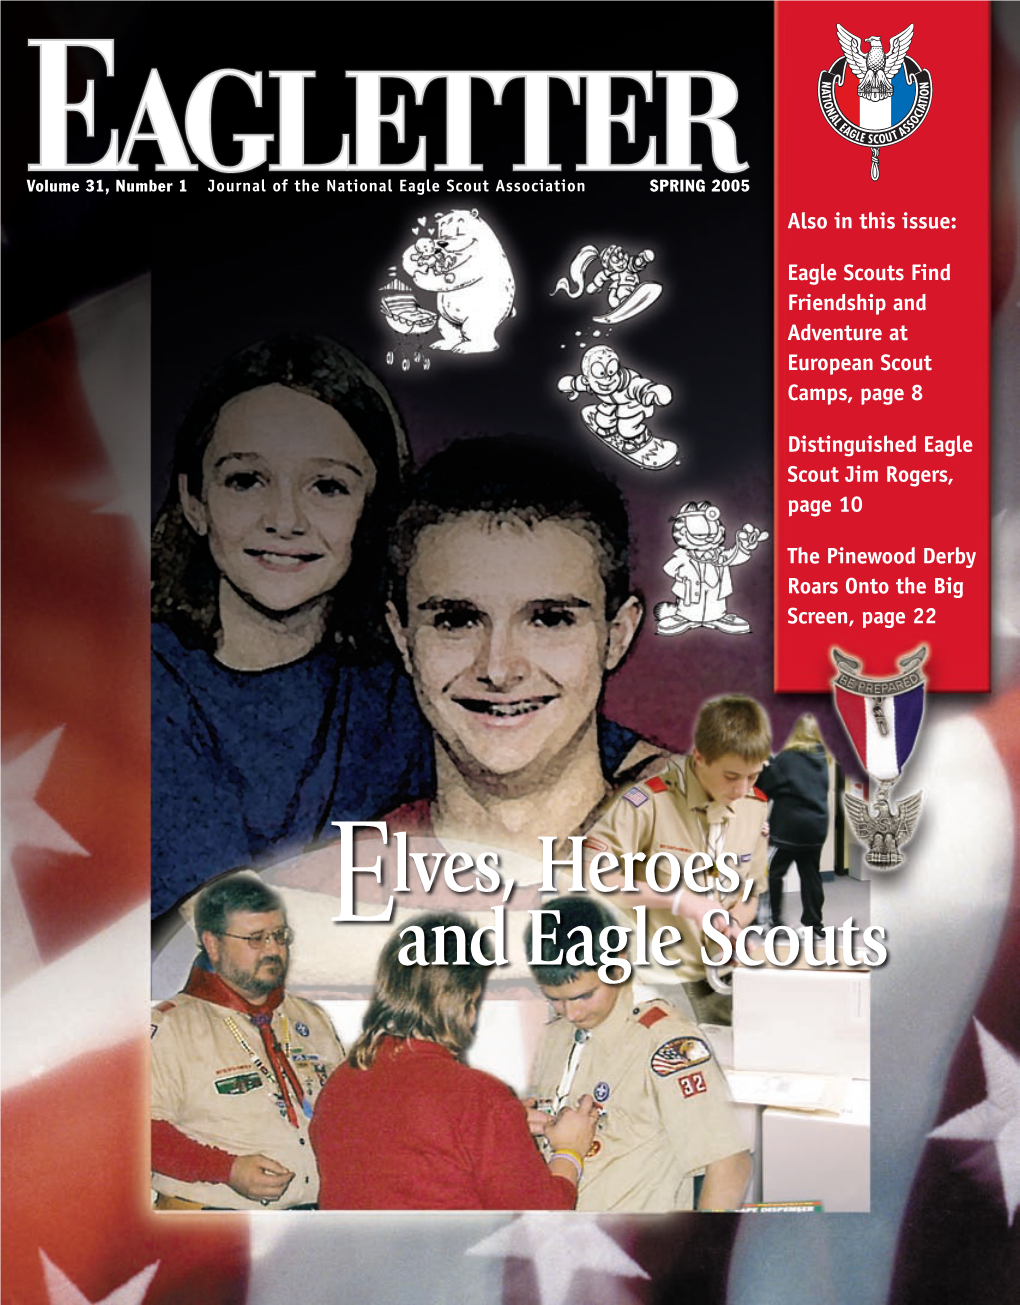 Elves, Heroes, and Eagle Scouts